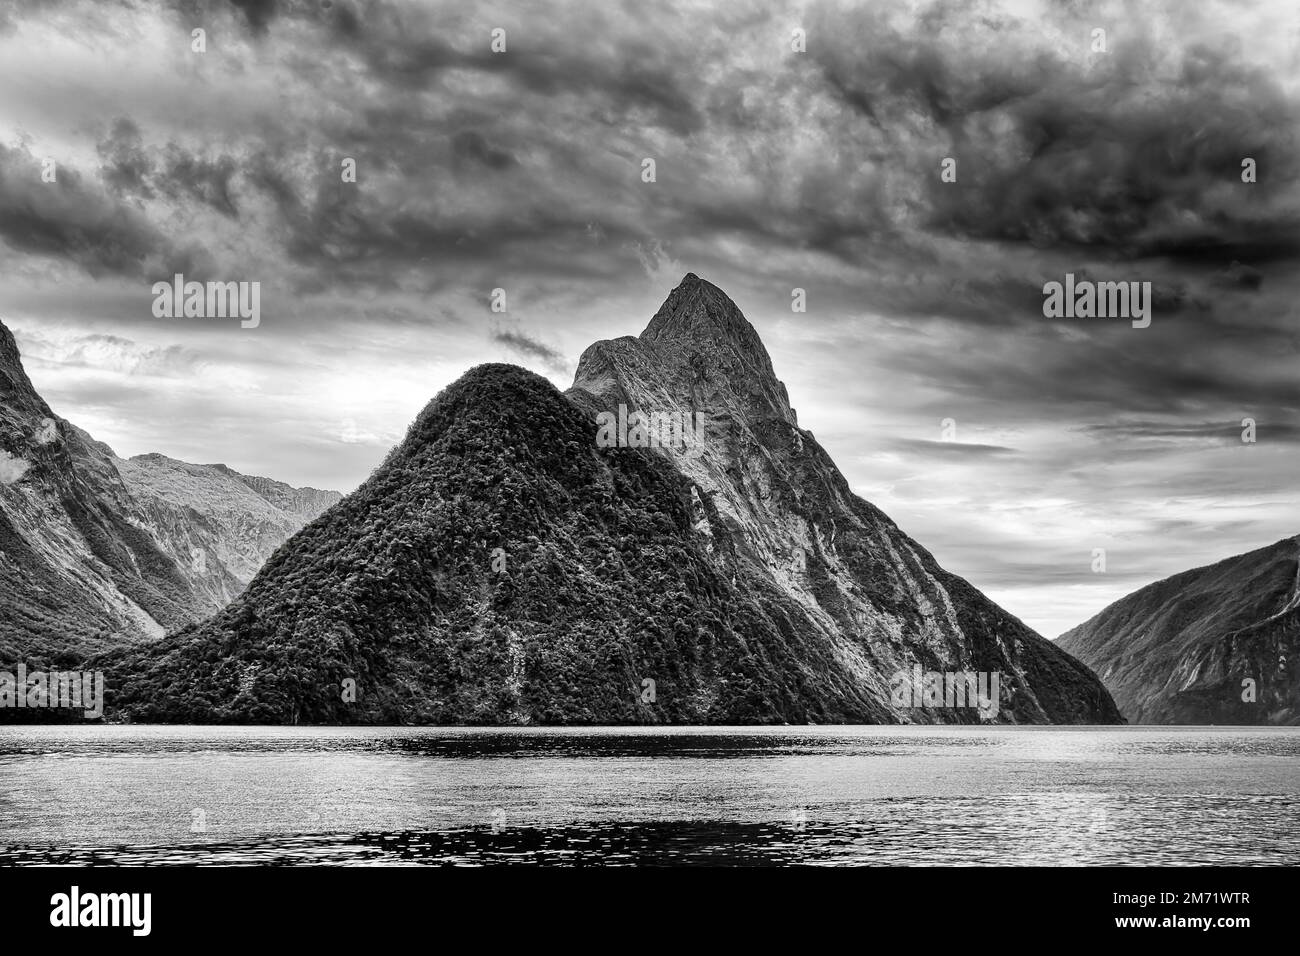 Dramatic black-white Mitre peak rock mountain in Milford Sound fiordland of New Zealand - scenic nature landscape view from cruise boat. Stock Photo